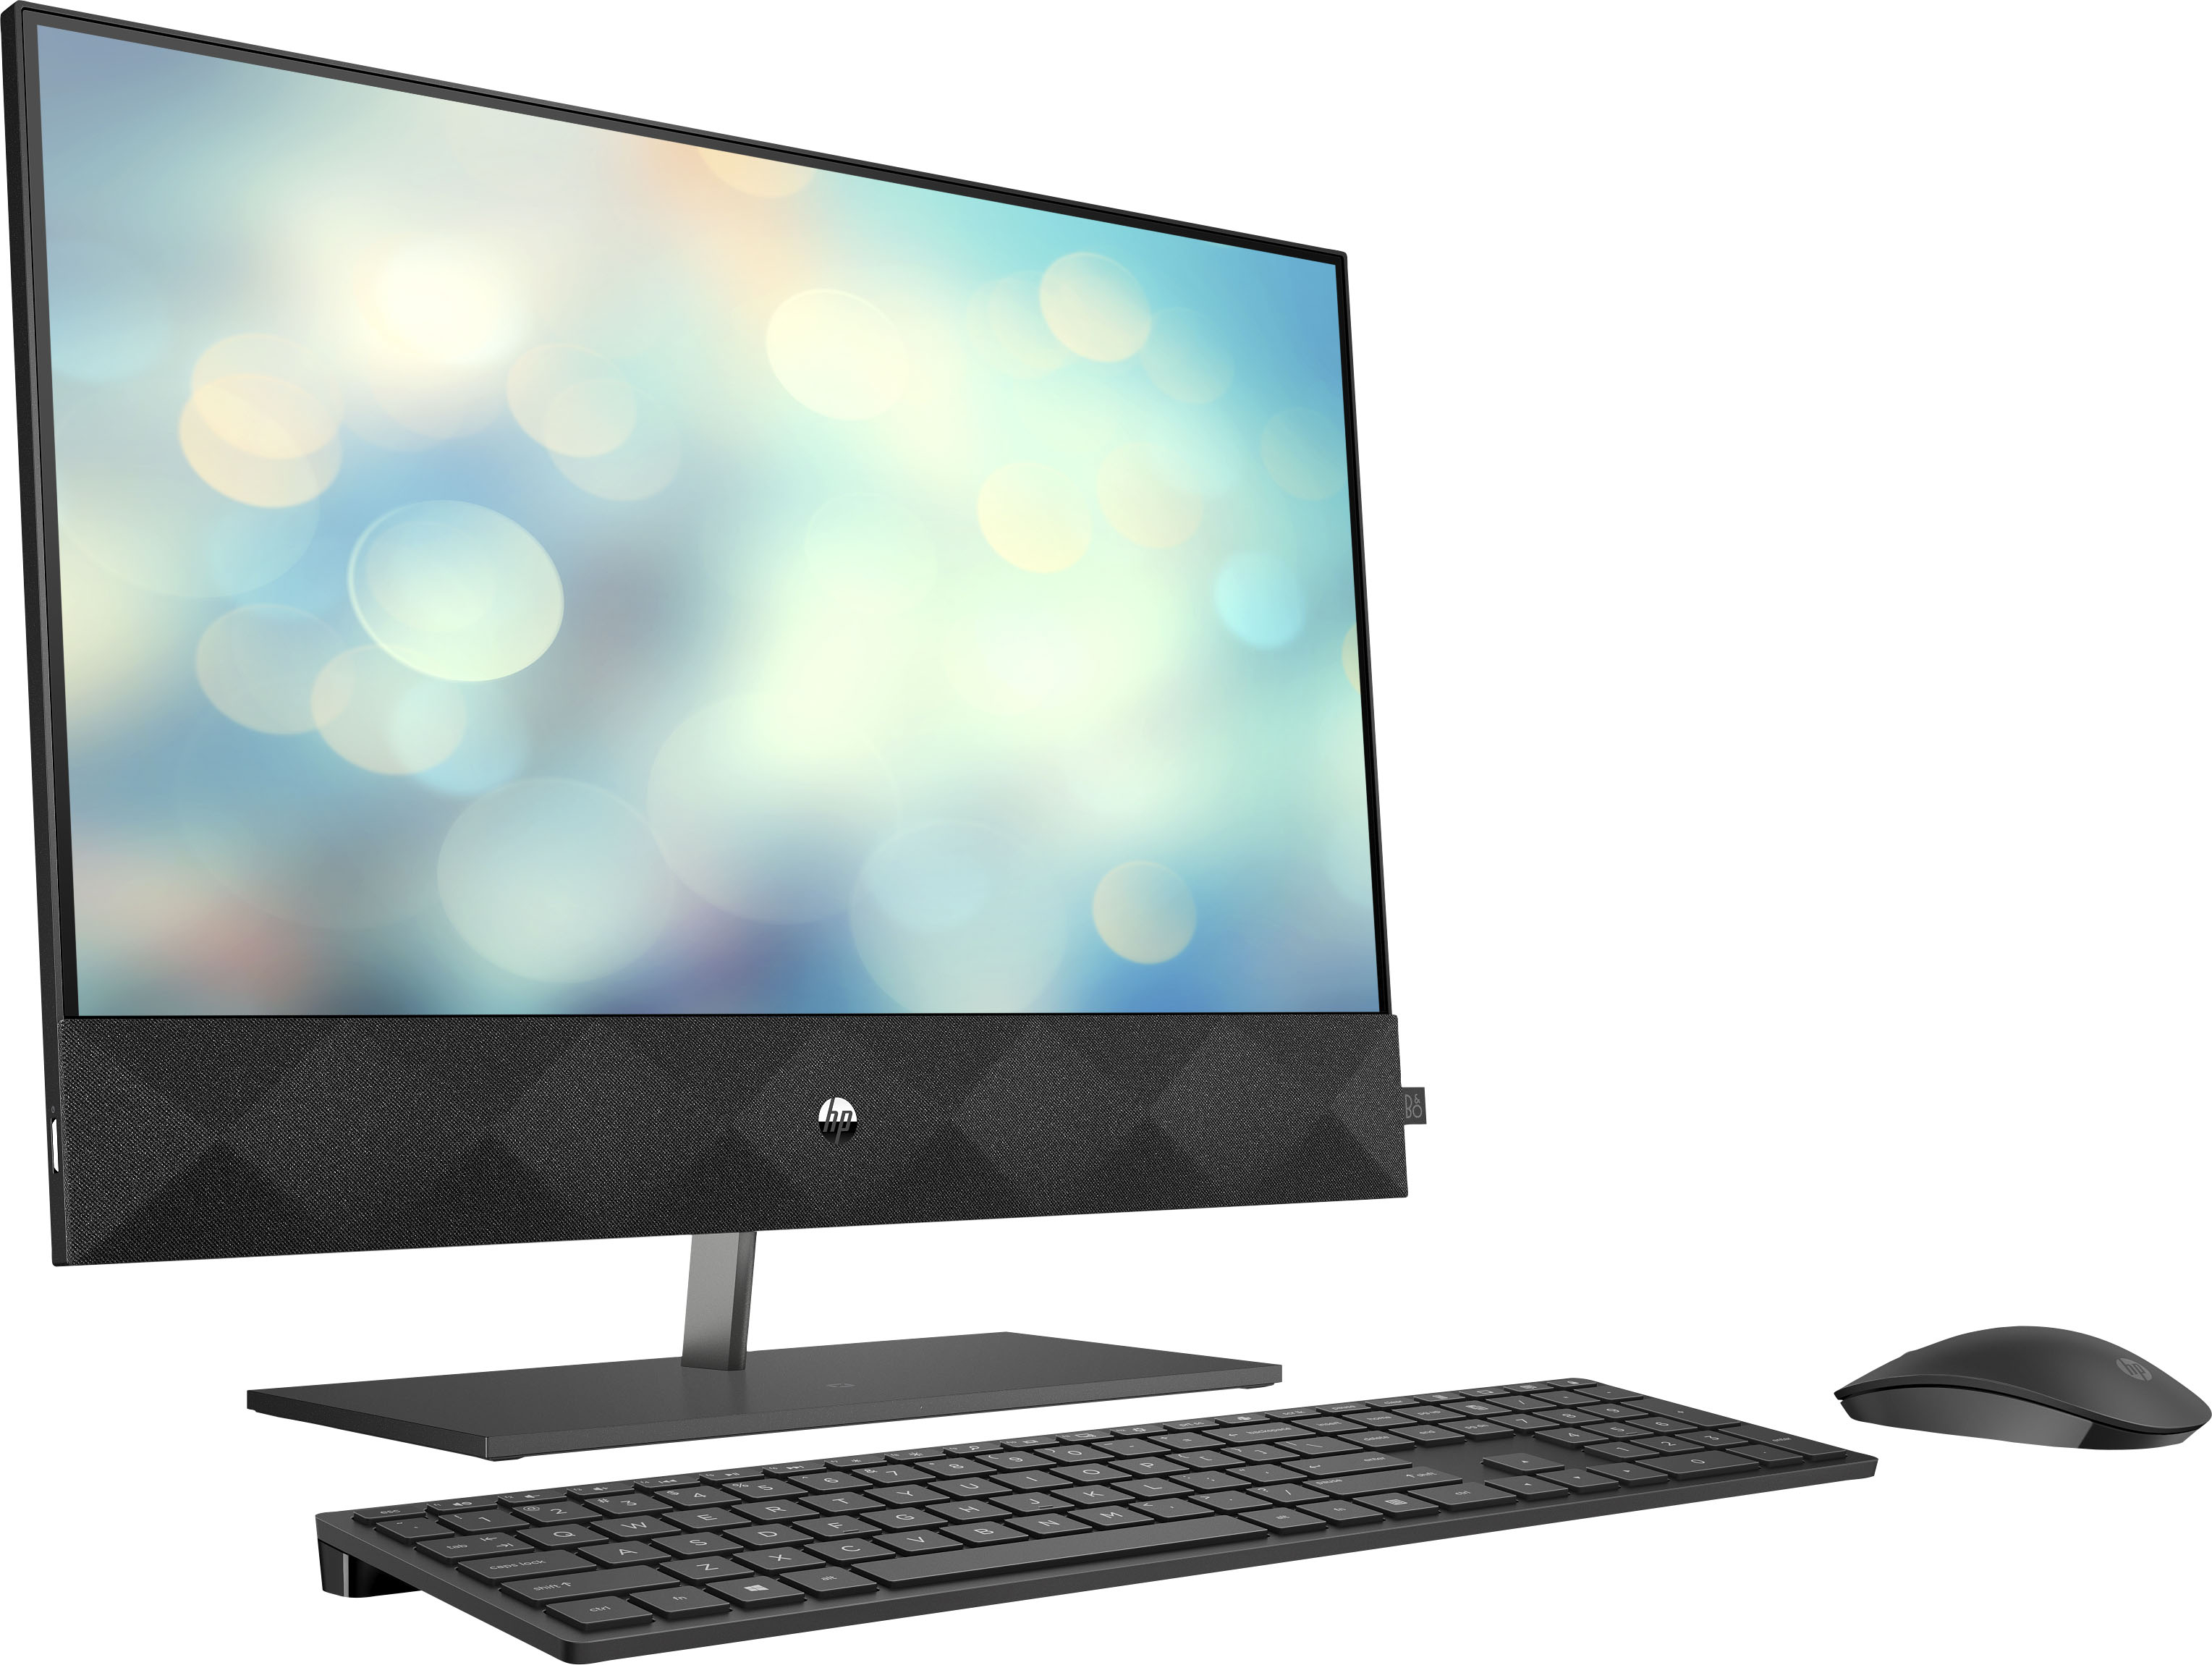 Angle View: HP - Pavilion 24" Touch-Screen All-In-One - Intel Core i5 -12GB Memory - 1TB SSD - Sparkling Black